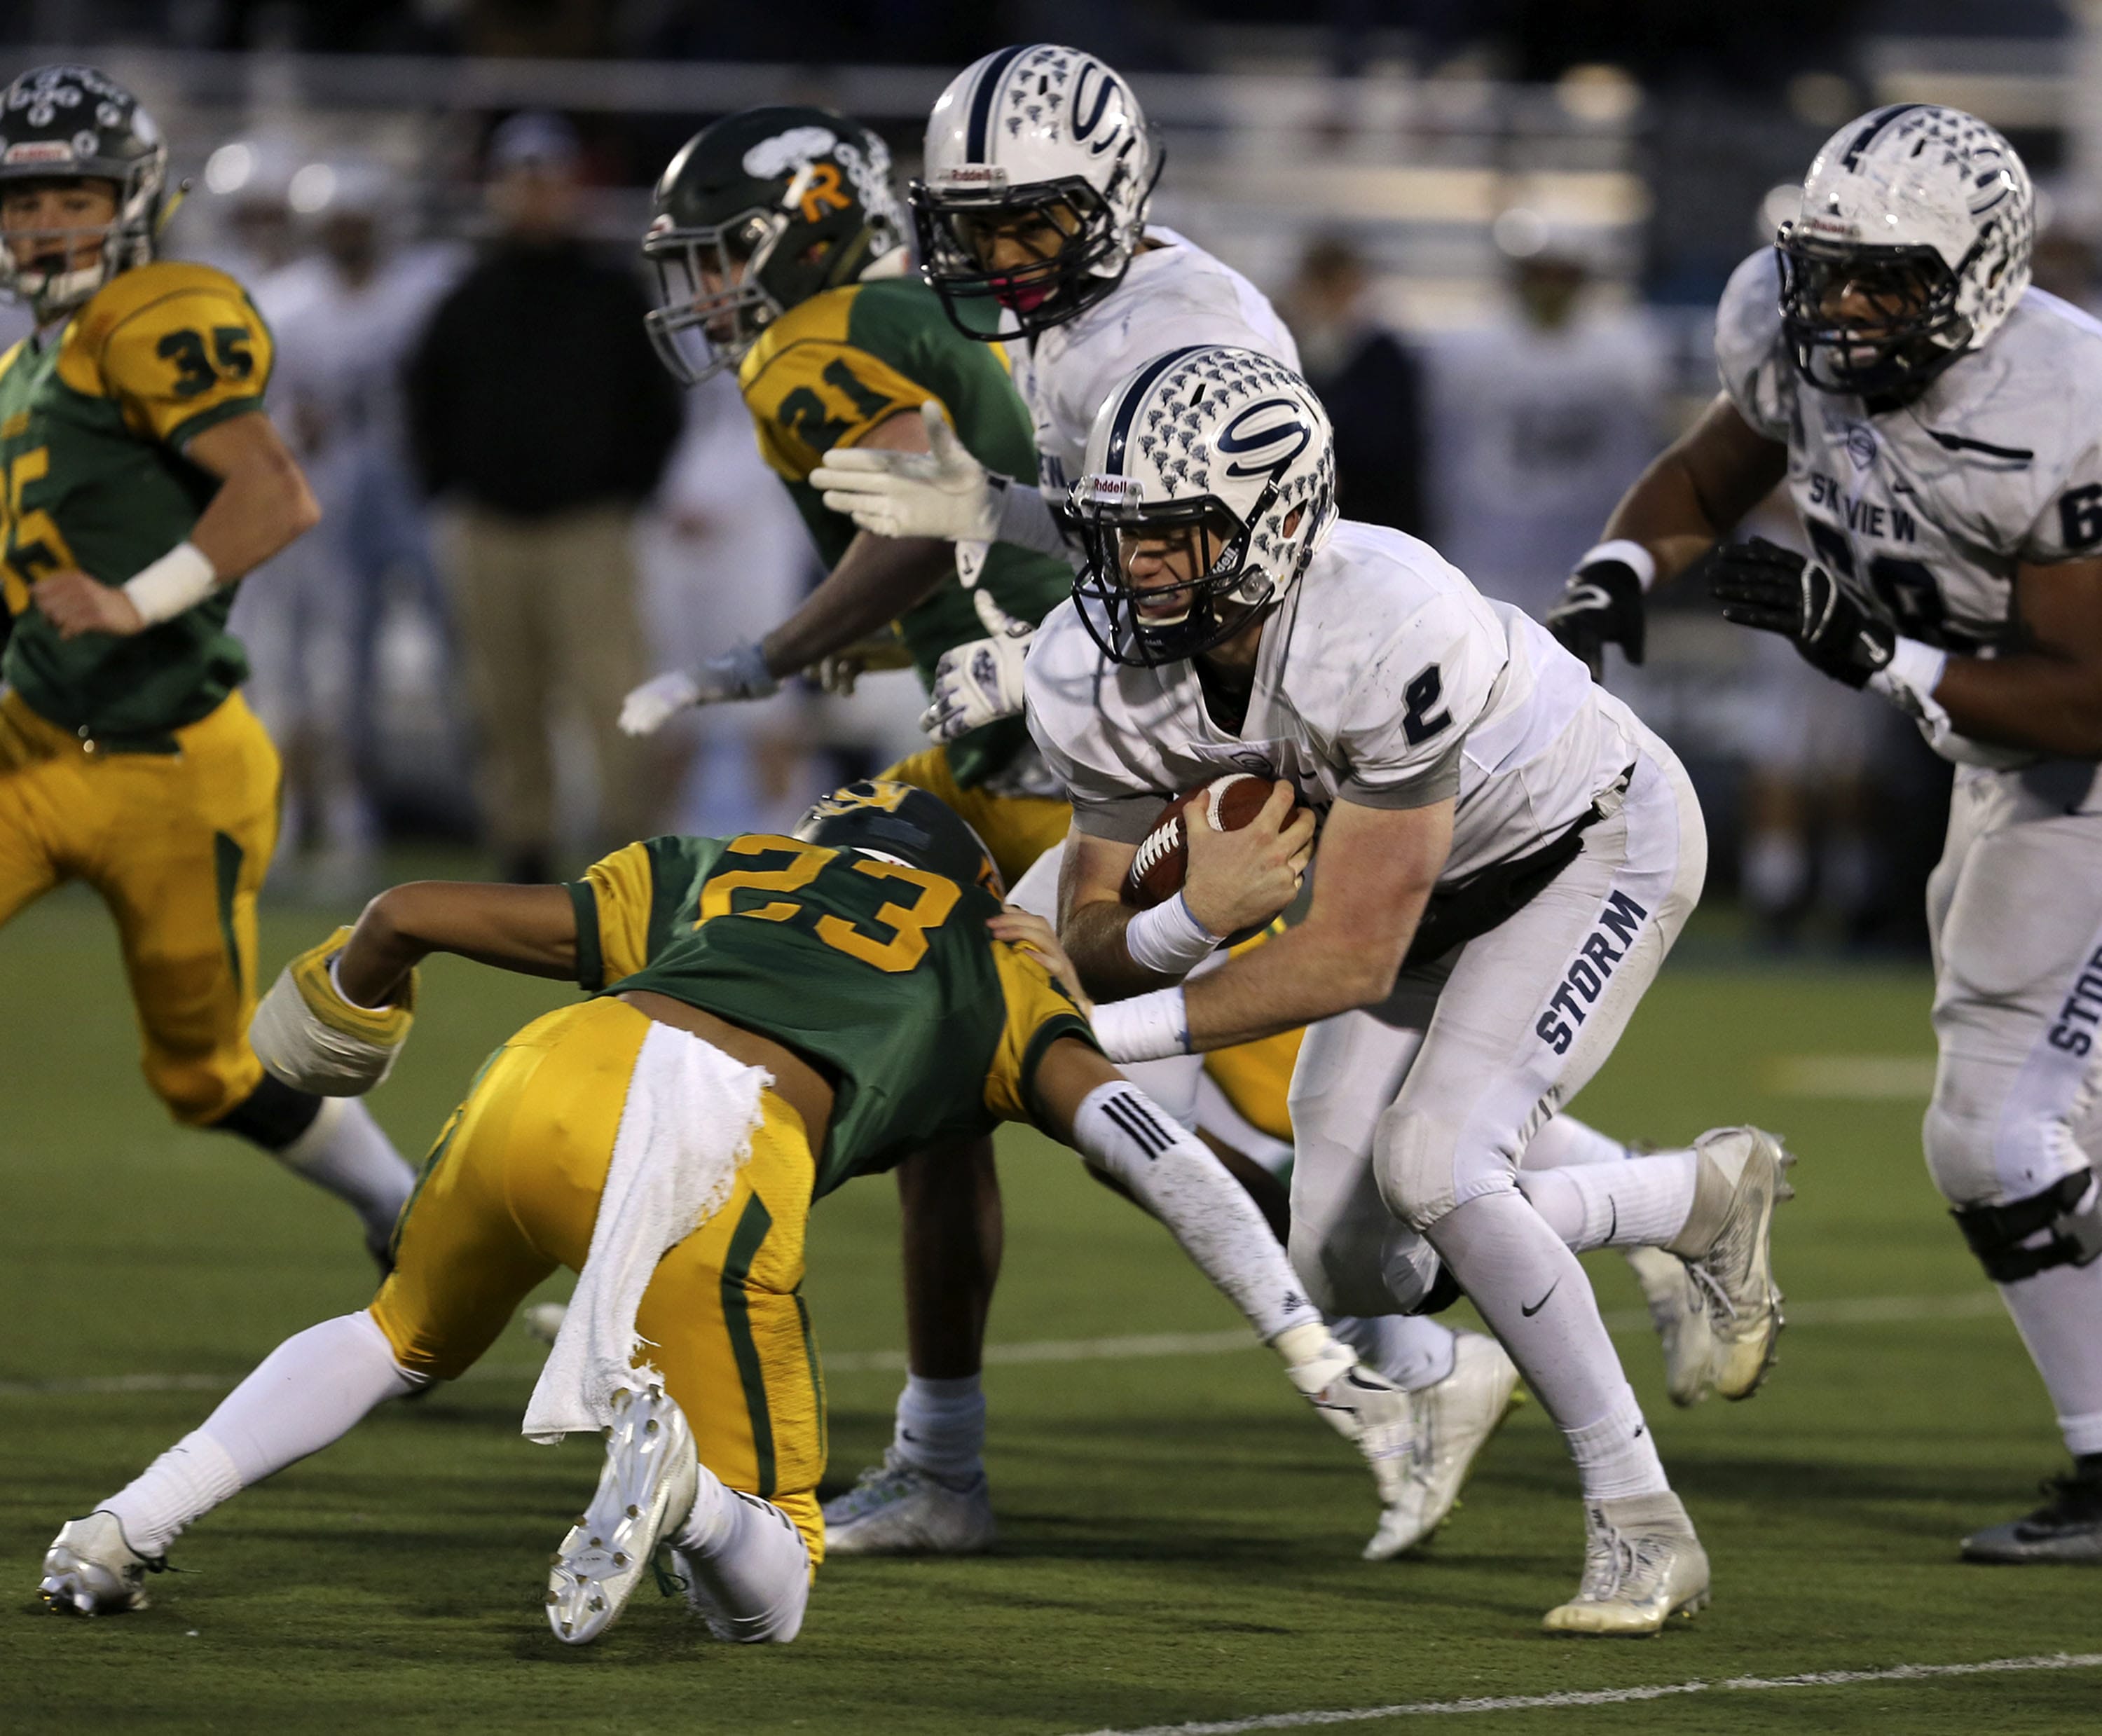 Skyview High School's Brody Barnum (2) is tackled by Richland High School's Josh Mendoza (23) Saturday during the 4A semifinal football game at Neil F.